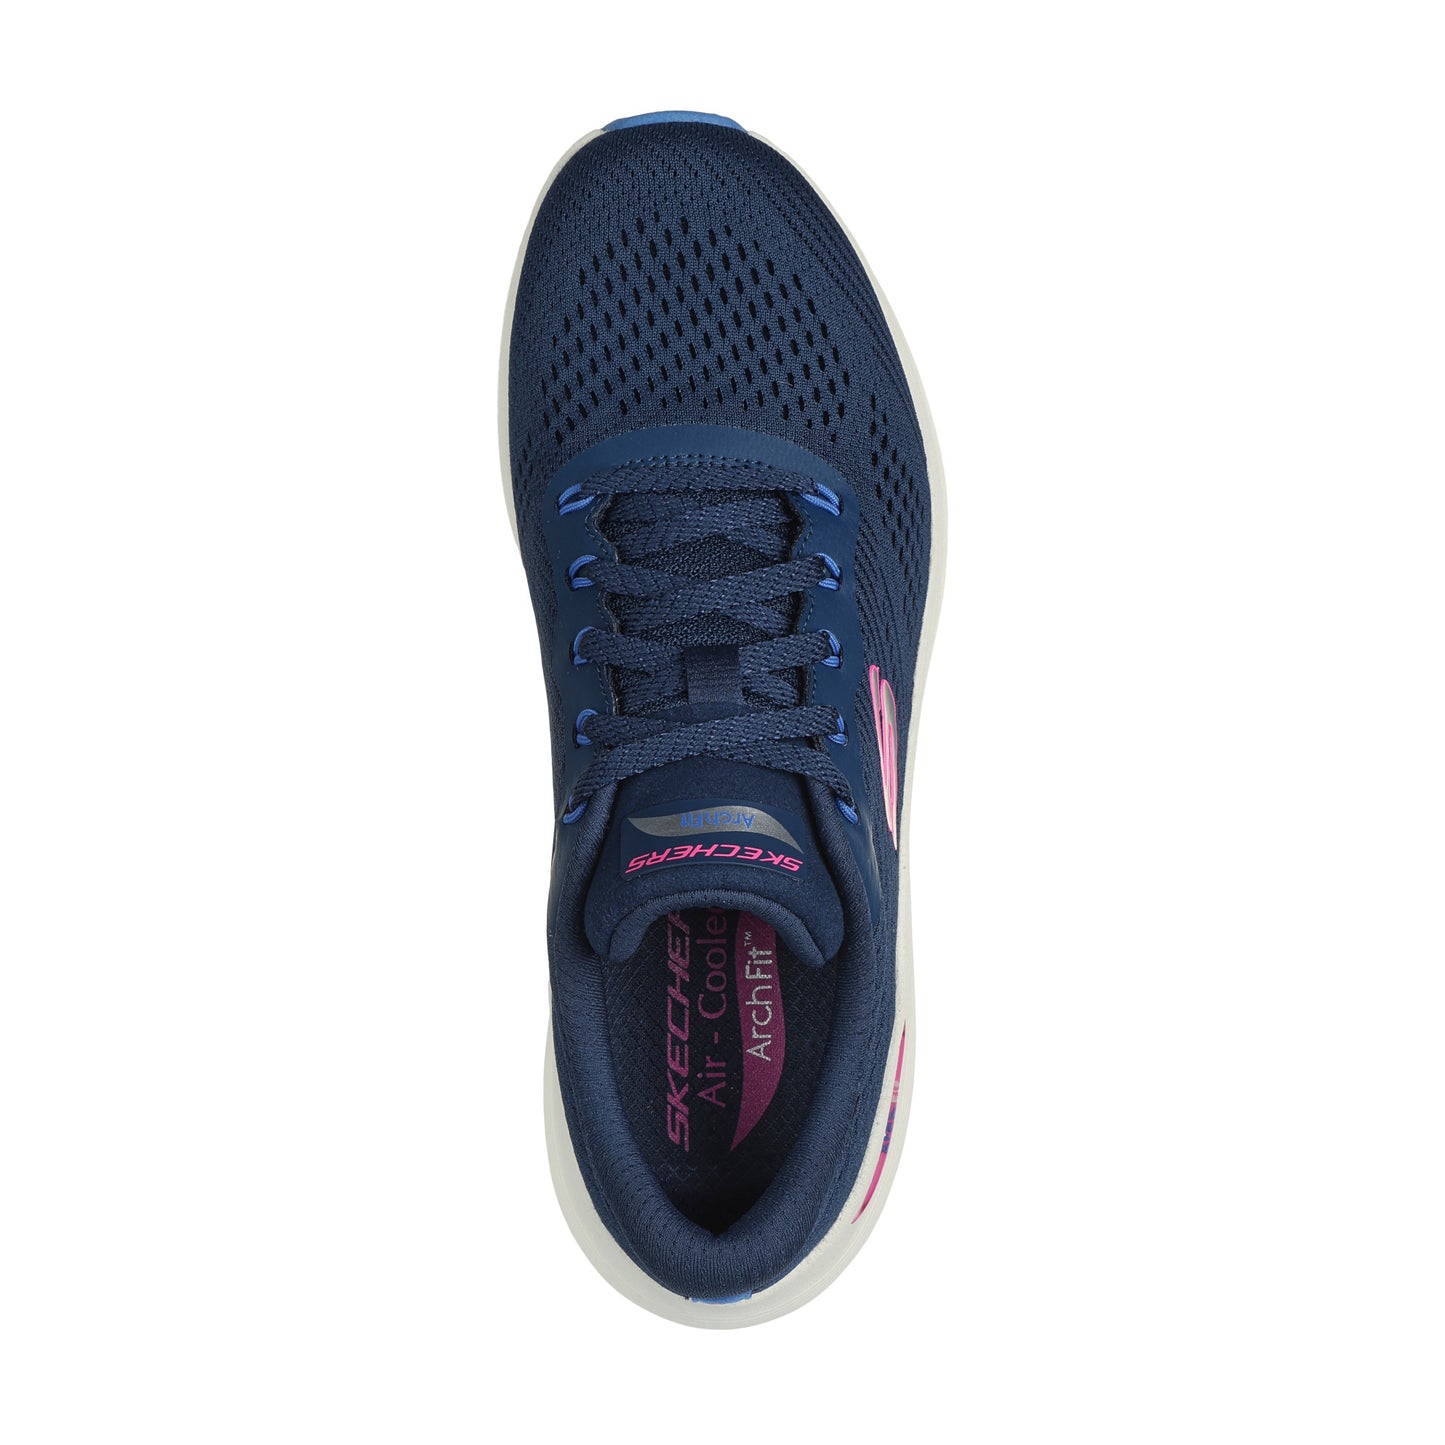 Skechers 150051 Arch Fit 2.0 Big League Navy Multi Trainers